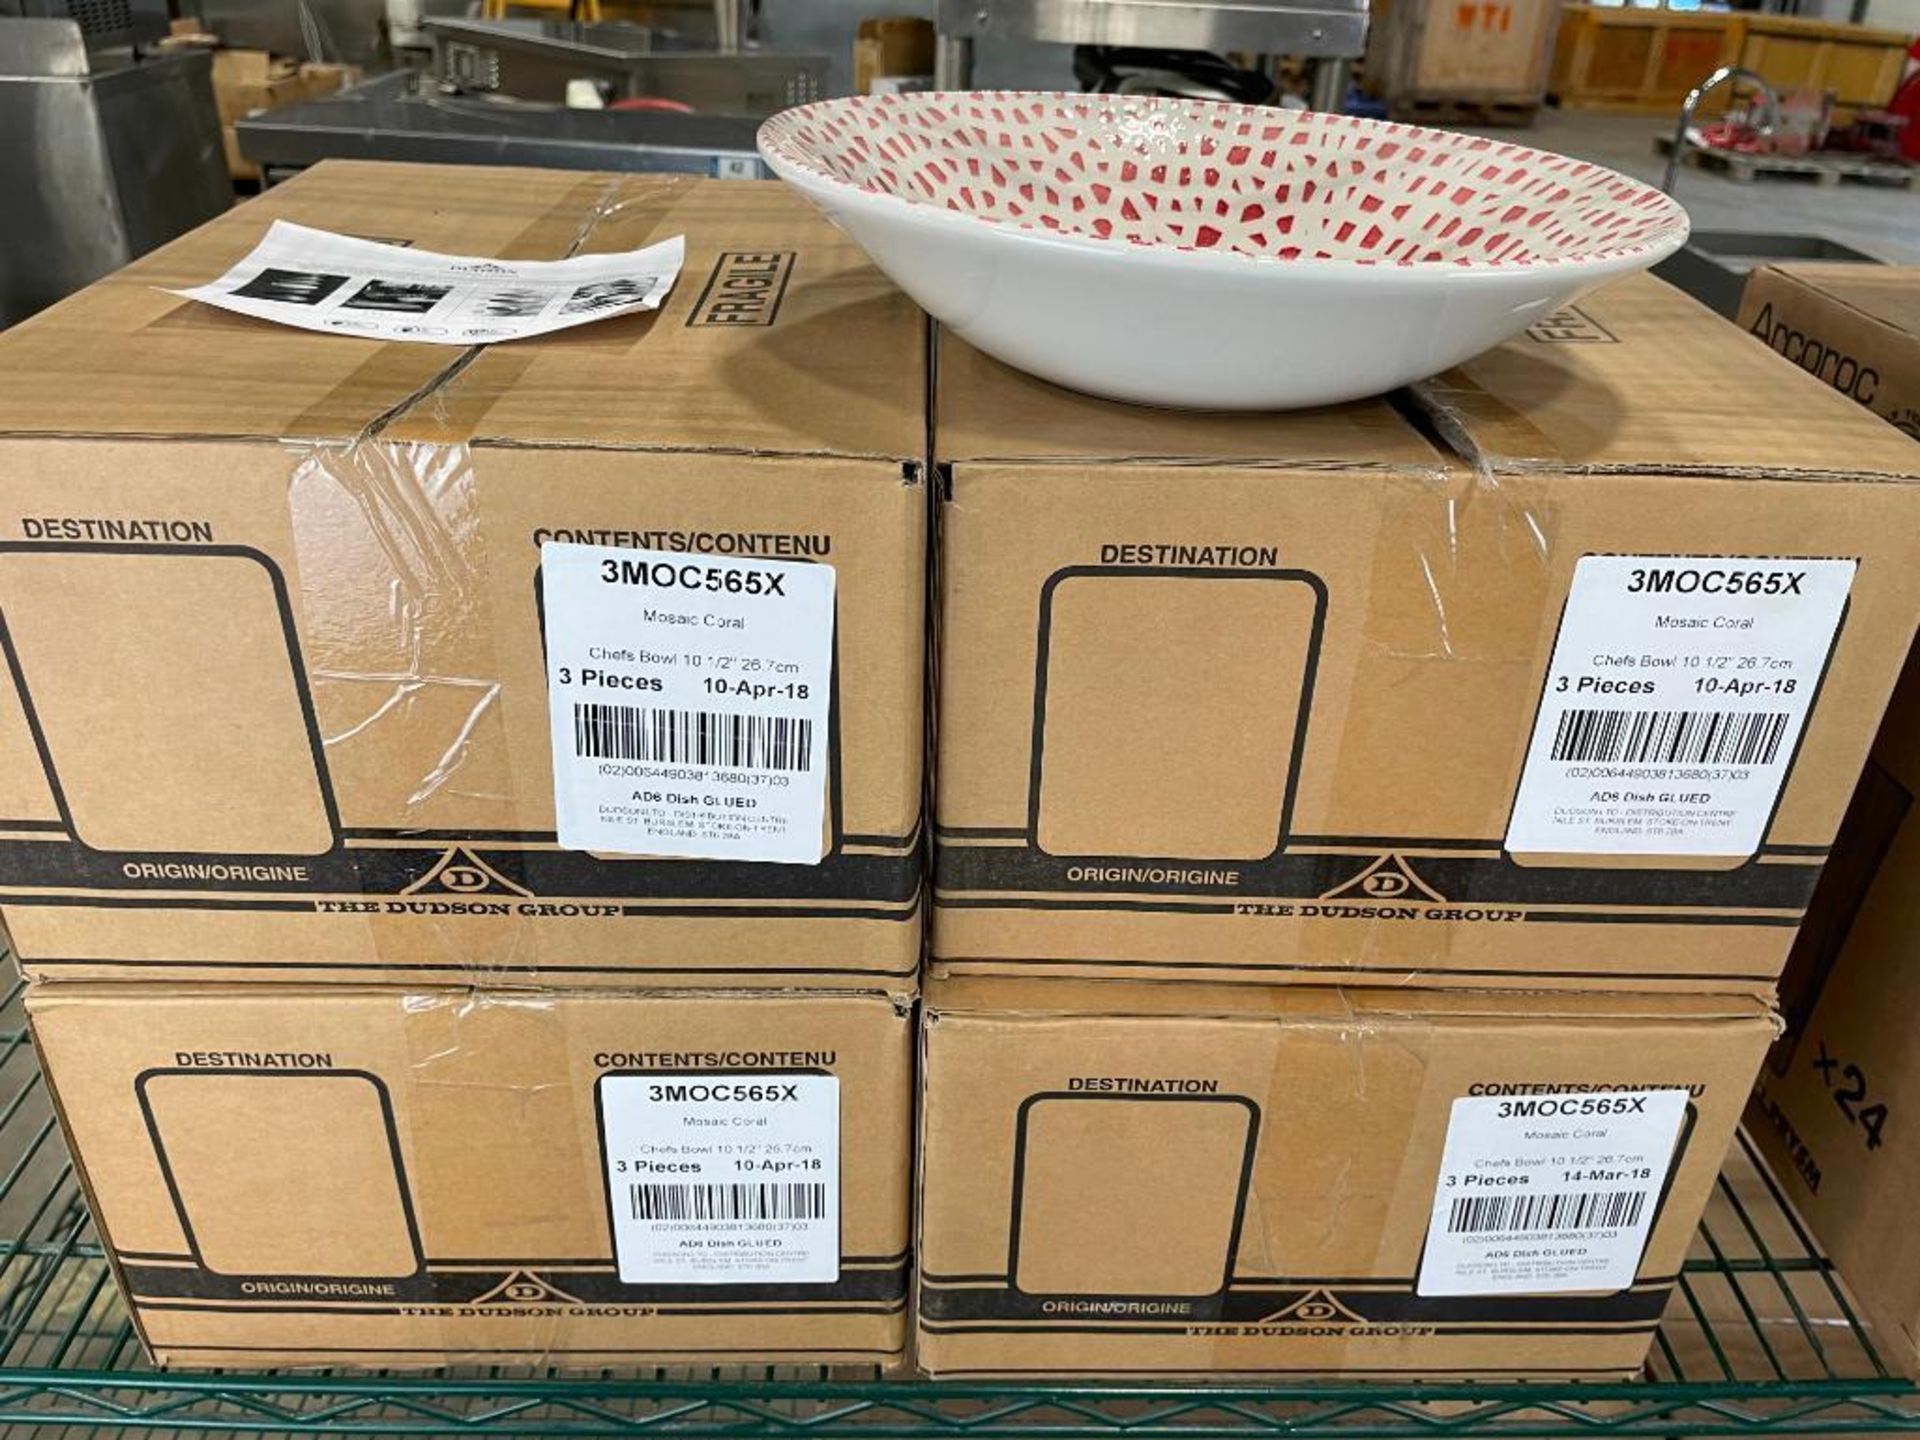 4 CASES OF DUDSON MOSAIC CORAL CHEF BOWLS 10 1/2" - 3/CASE - MADE IN ENGLAND - Image 2 of 7